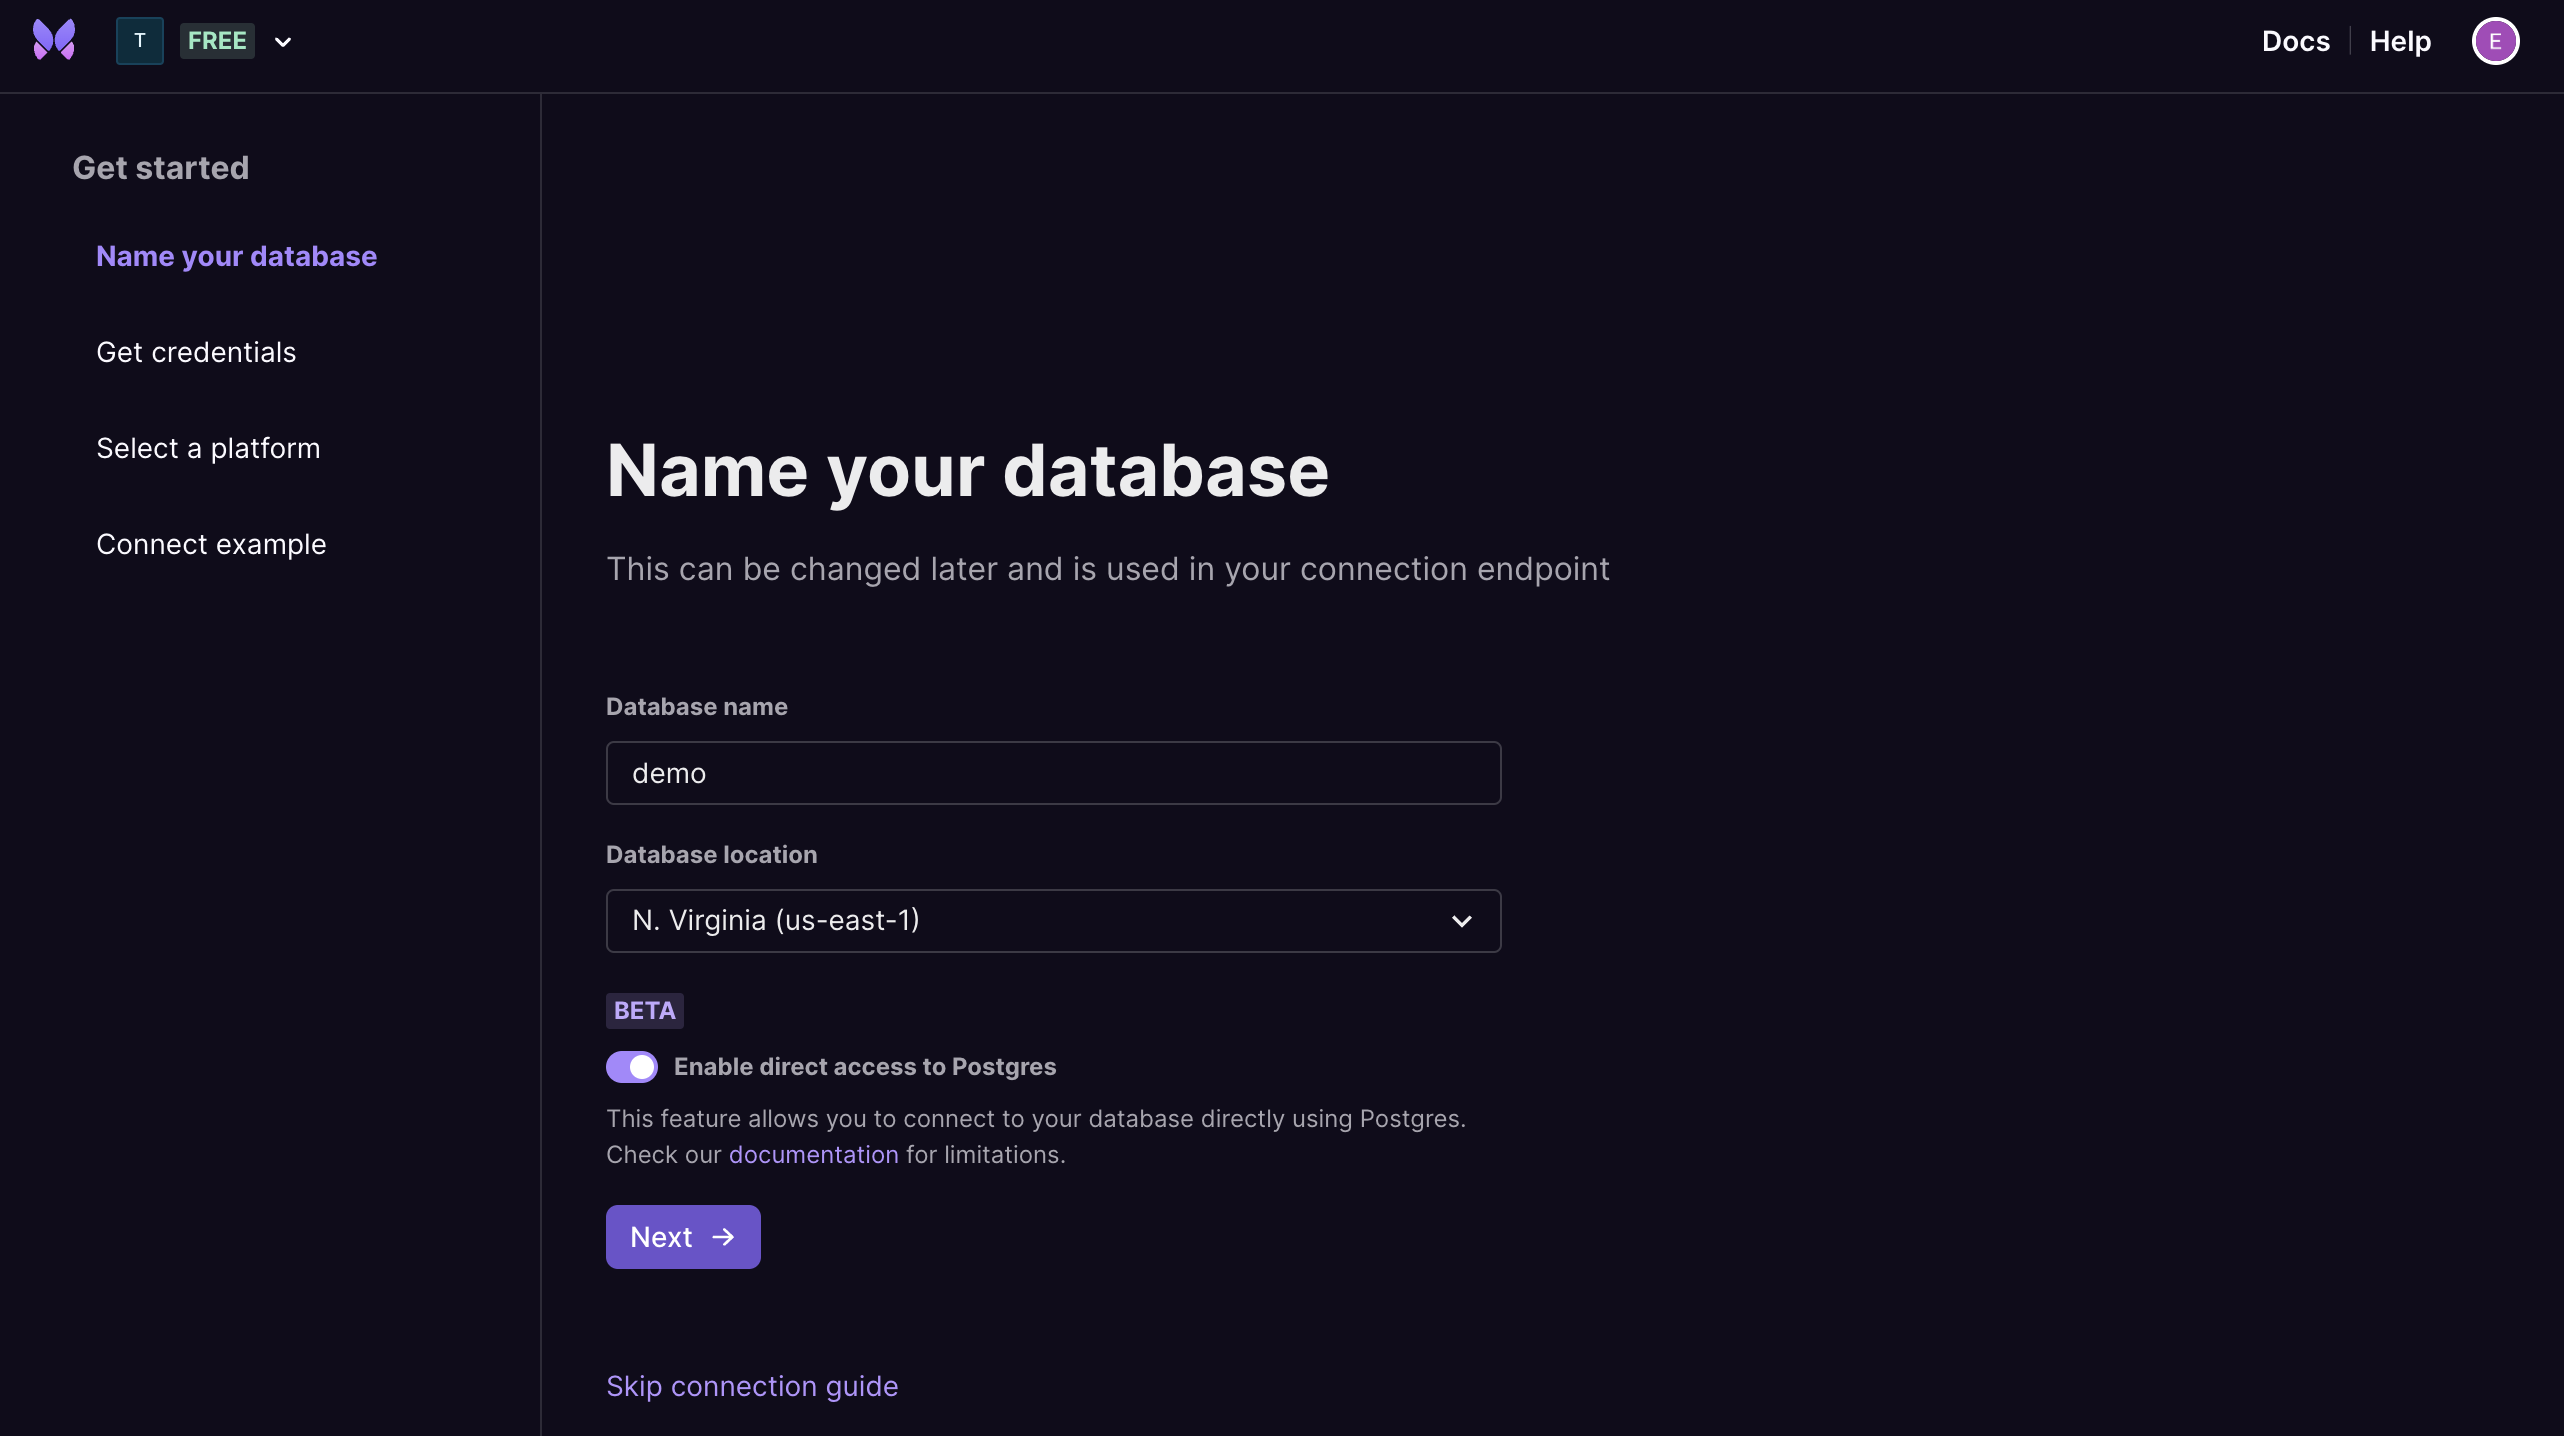 Enable direct access for your database